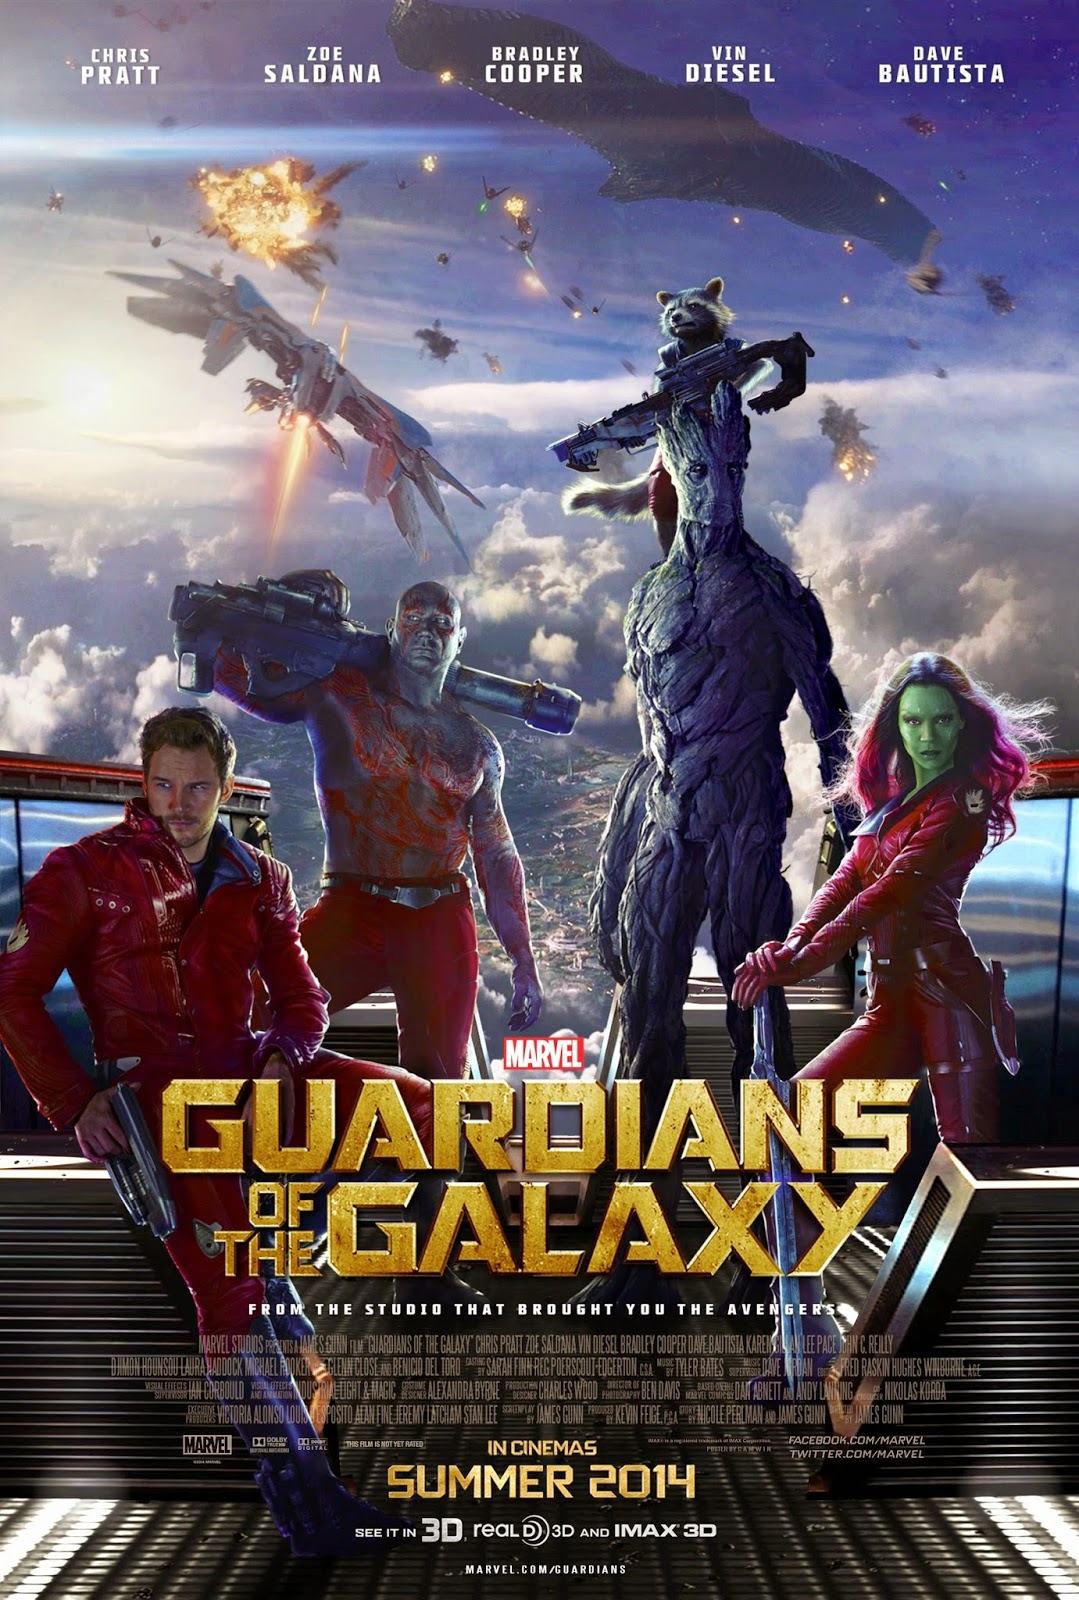 geekmatic-pcheng-s-movie-review-guardians-of-the-galaxy